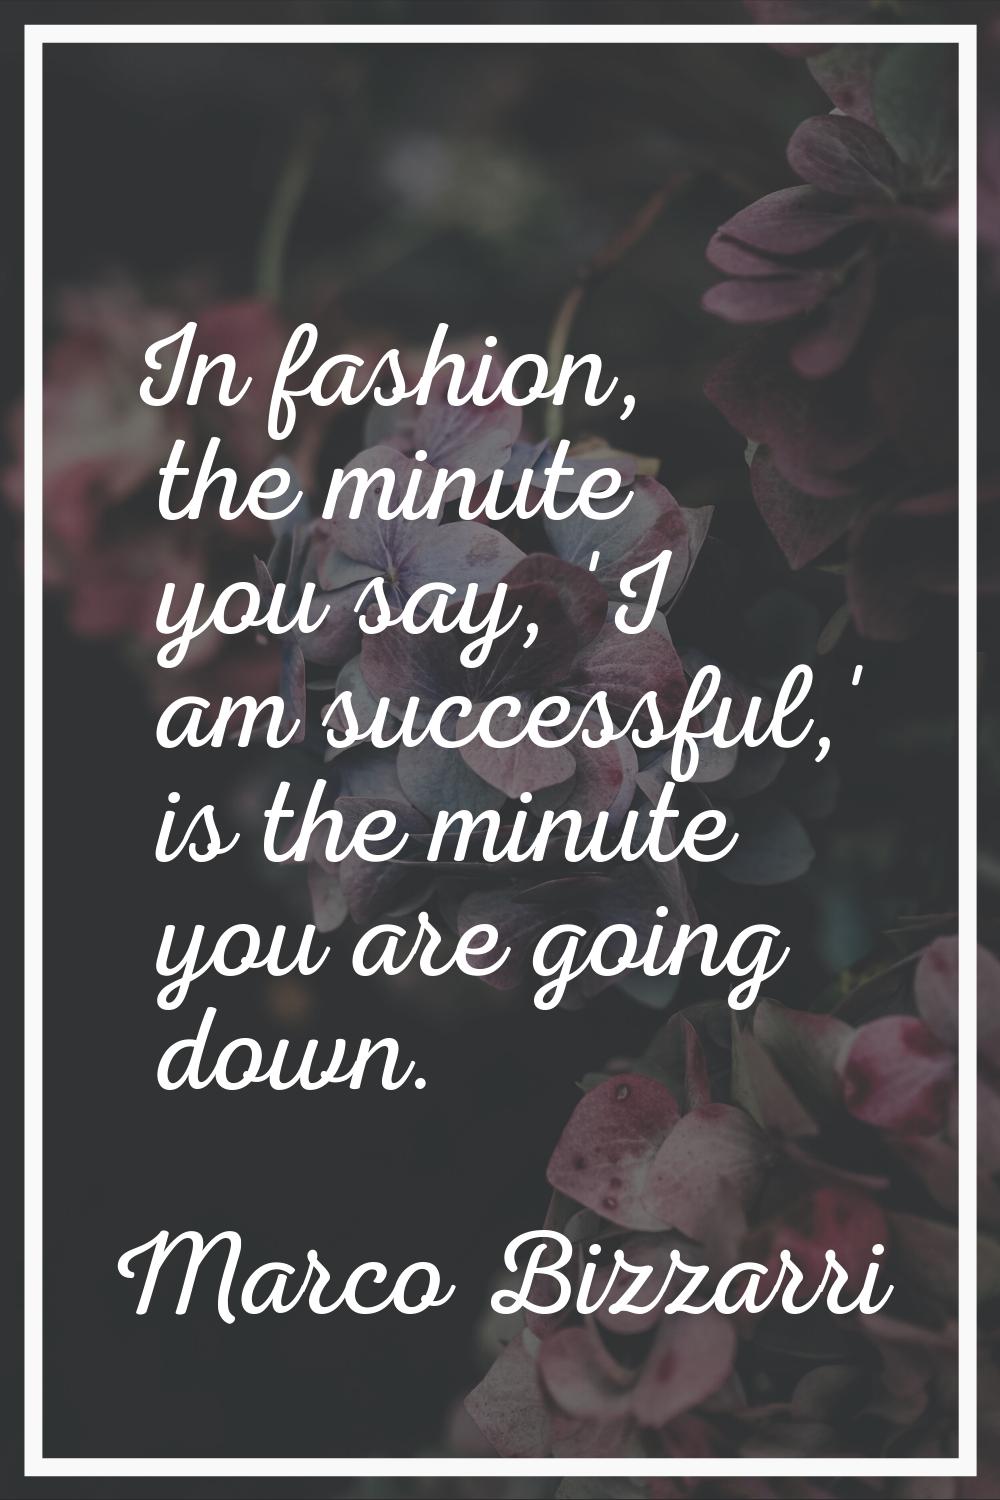 In fashion, the minute you say, 'I am successful,' is the minute you are going down.